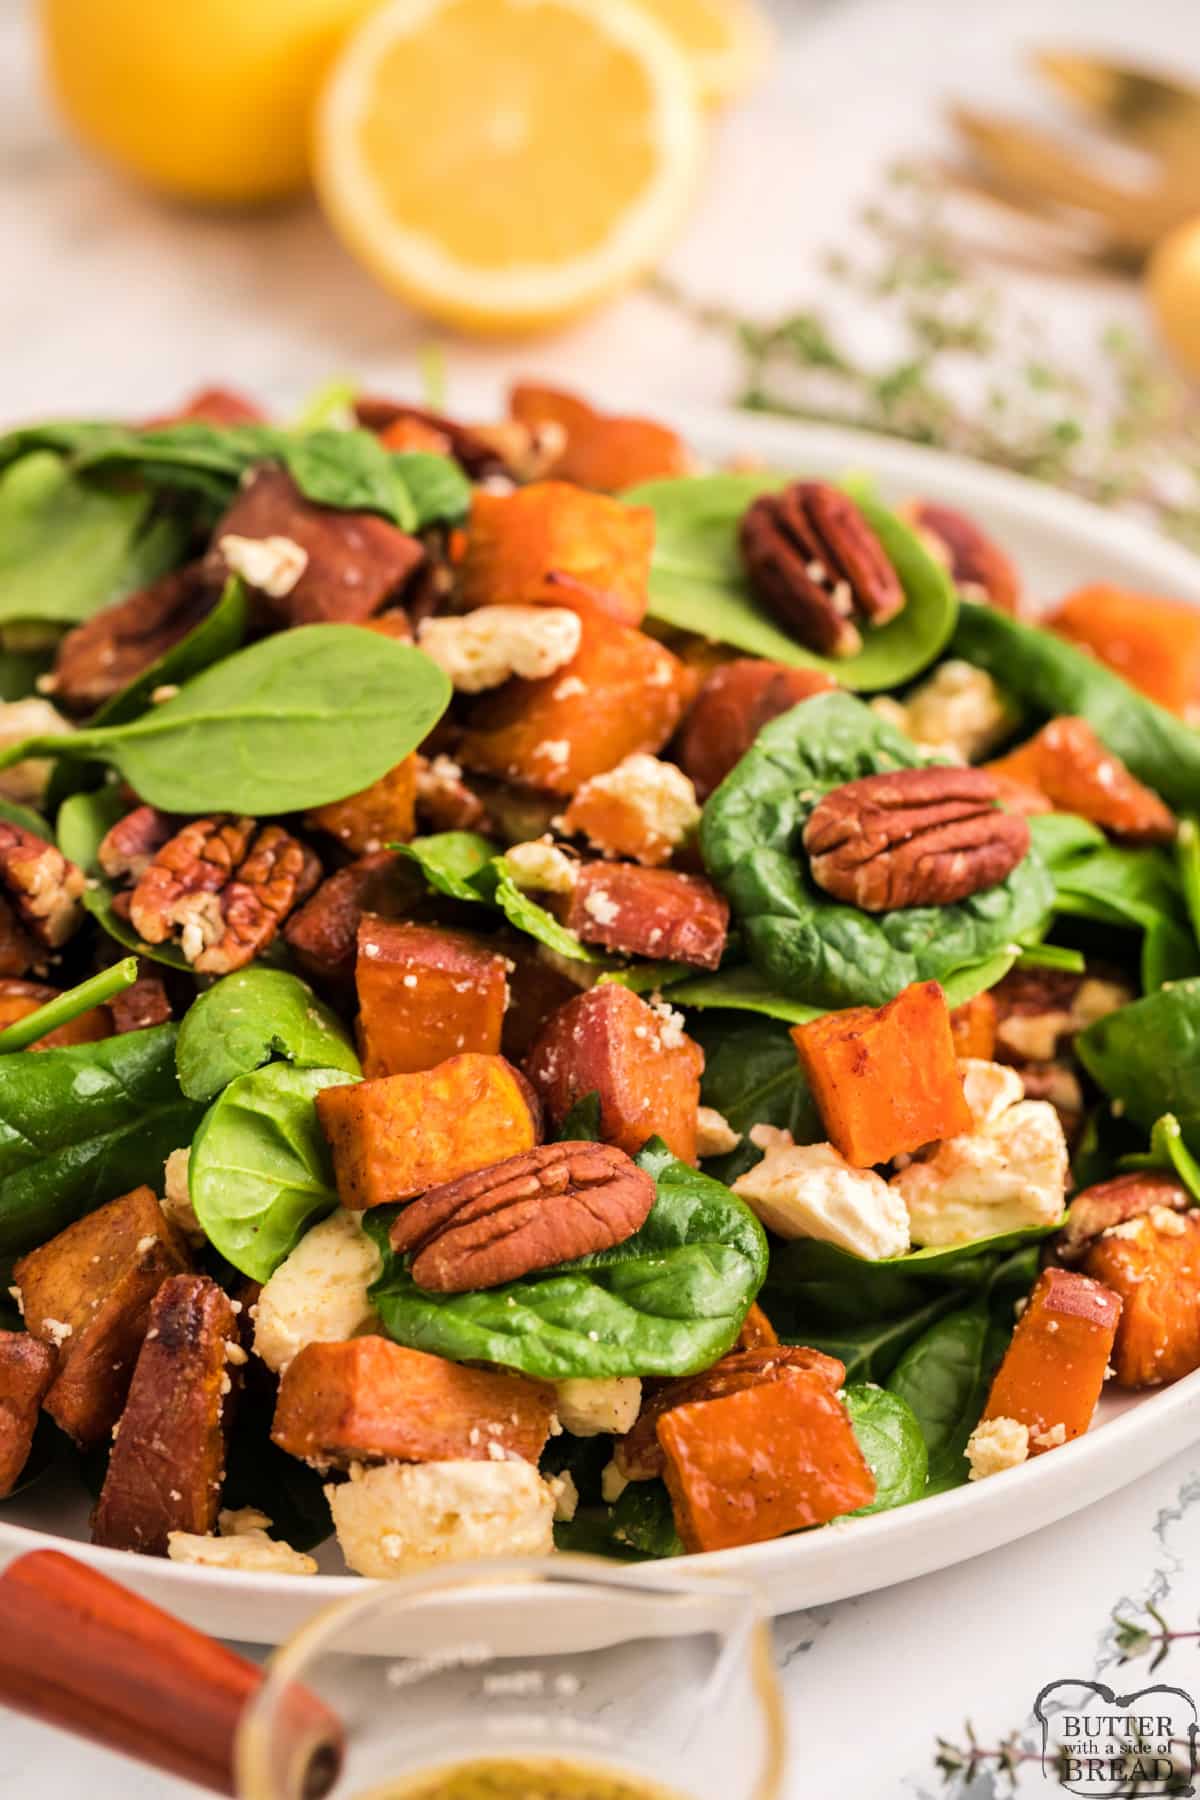 Spinach with pecans, sweet potatoes and feta. 